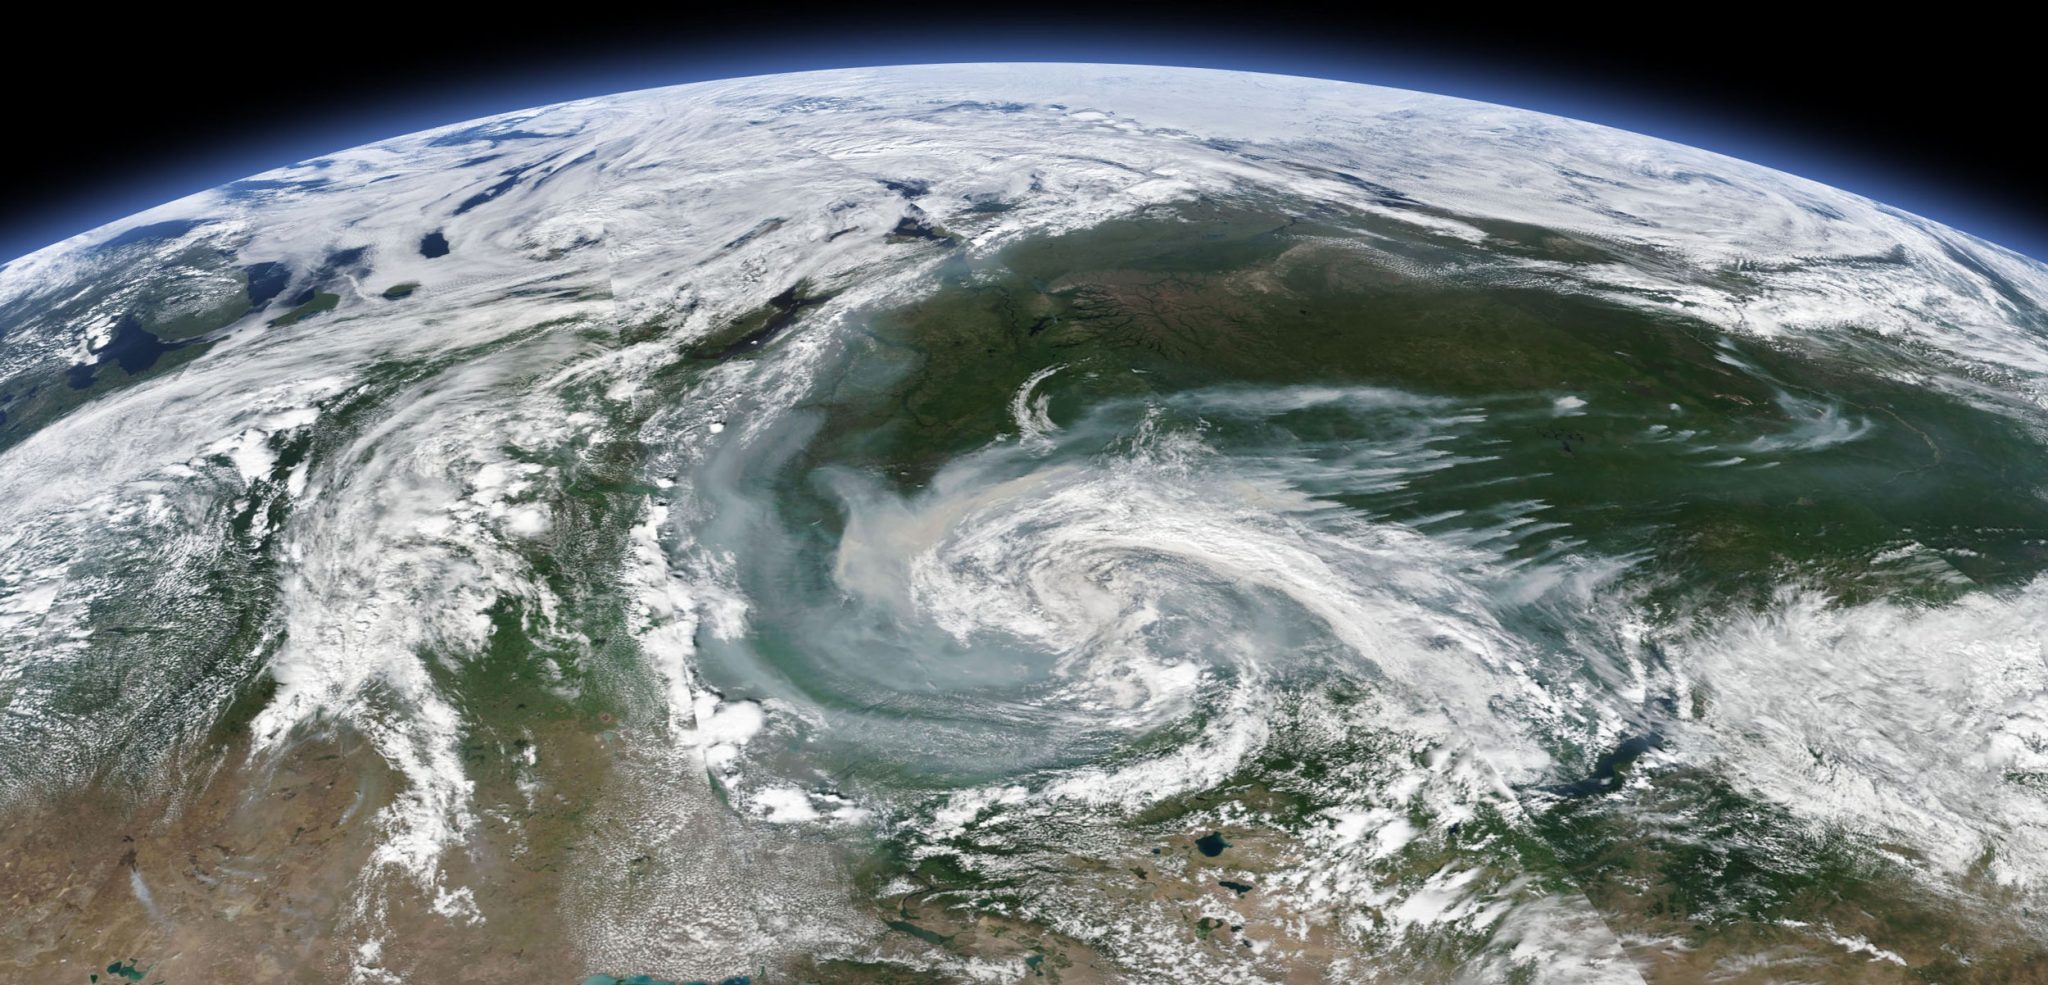 Global warming is making wildfires more common. In the Arctic Ocean and other nutrient-limited ecosystems, the extra nutrients borne by wildfire smoke can trigger algae blooms.